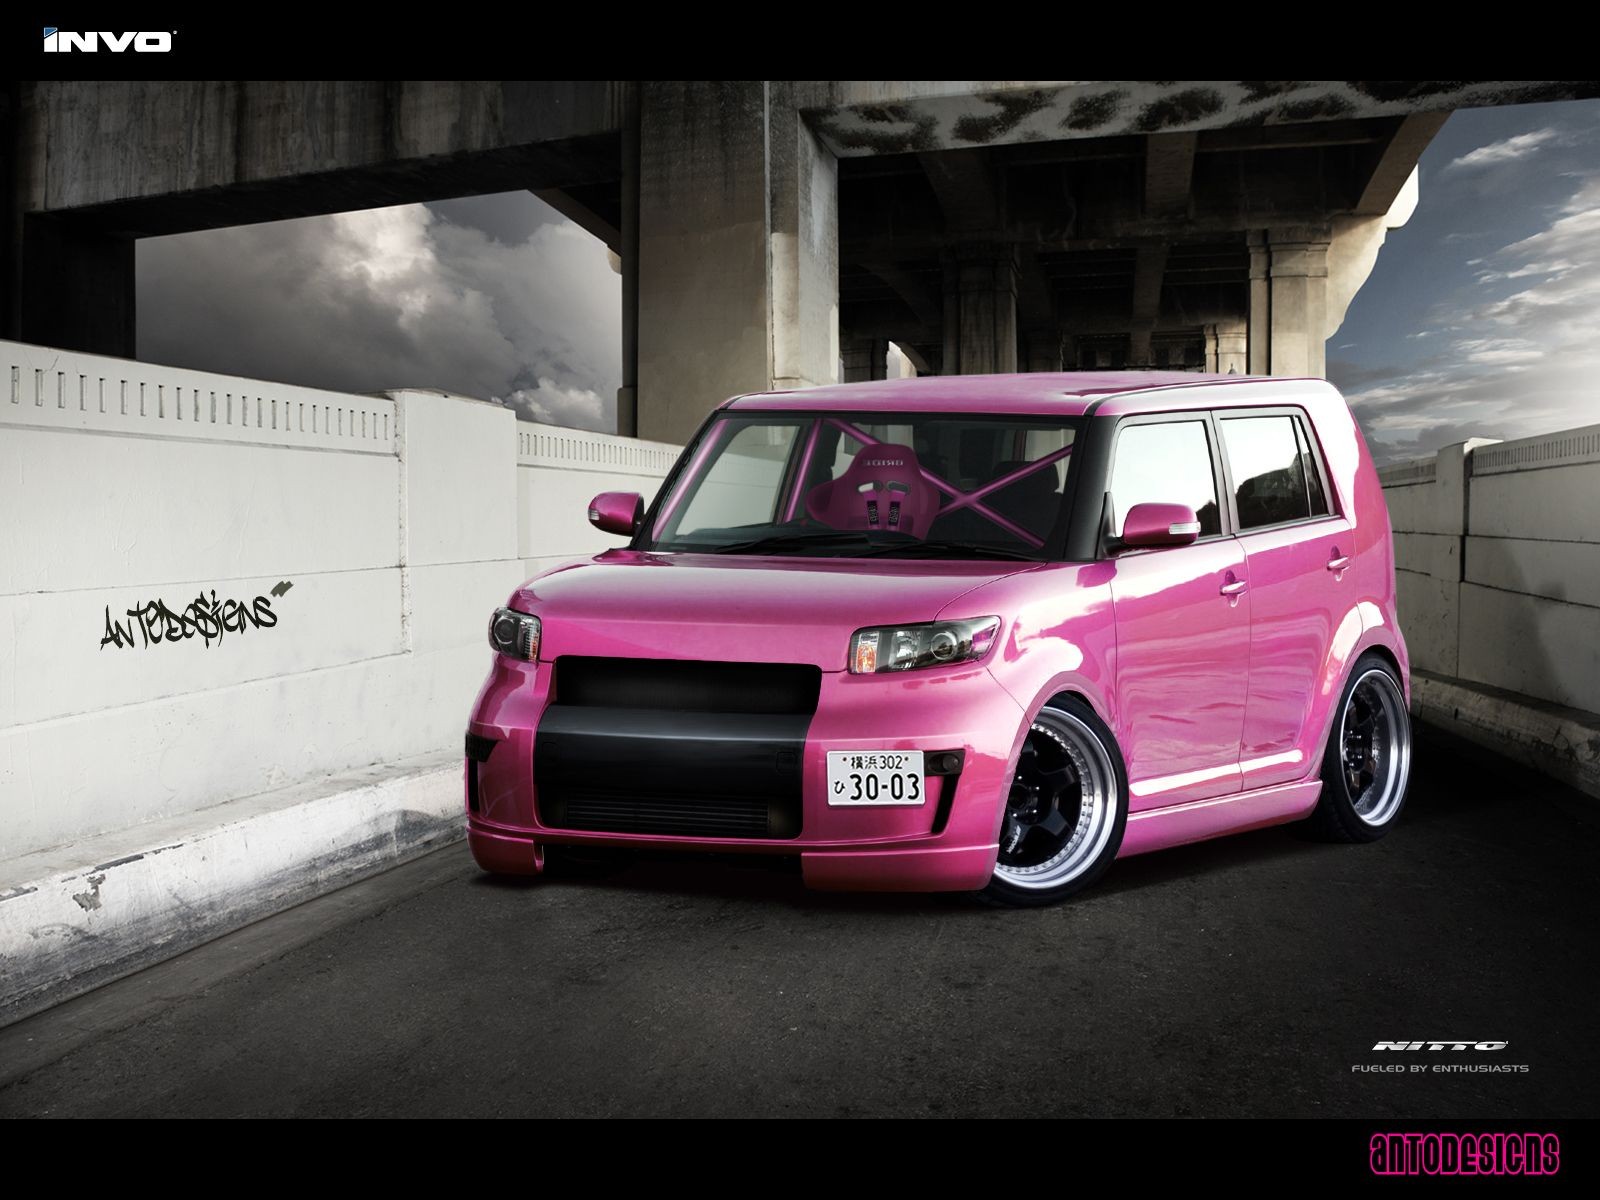 Perfect Scion XB to support National Denim Day May 14th and the fight against Breast Cancer